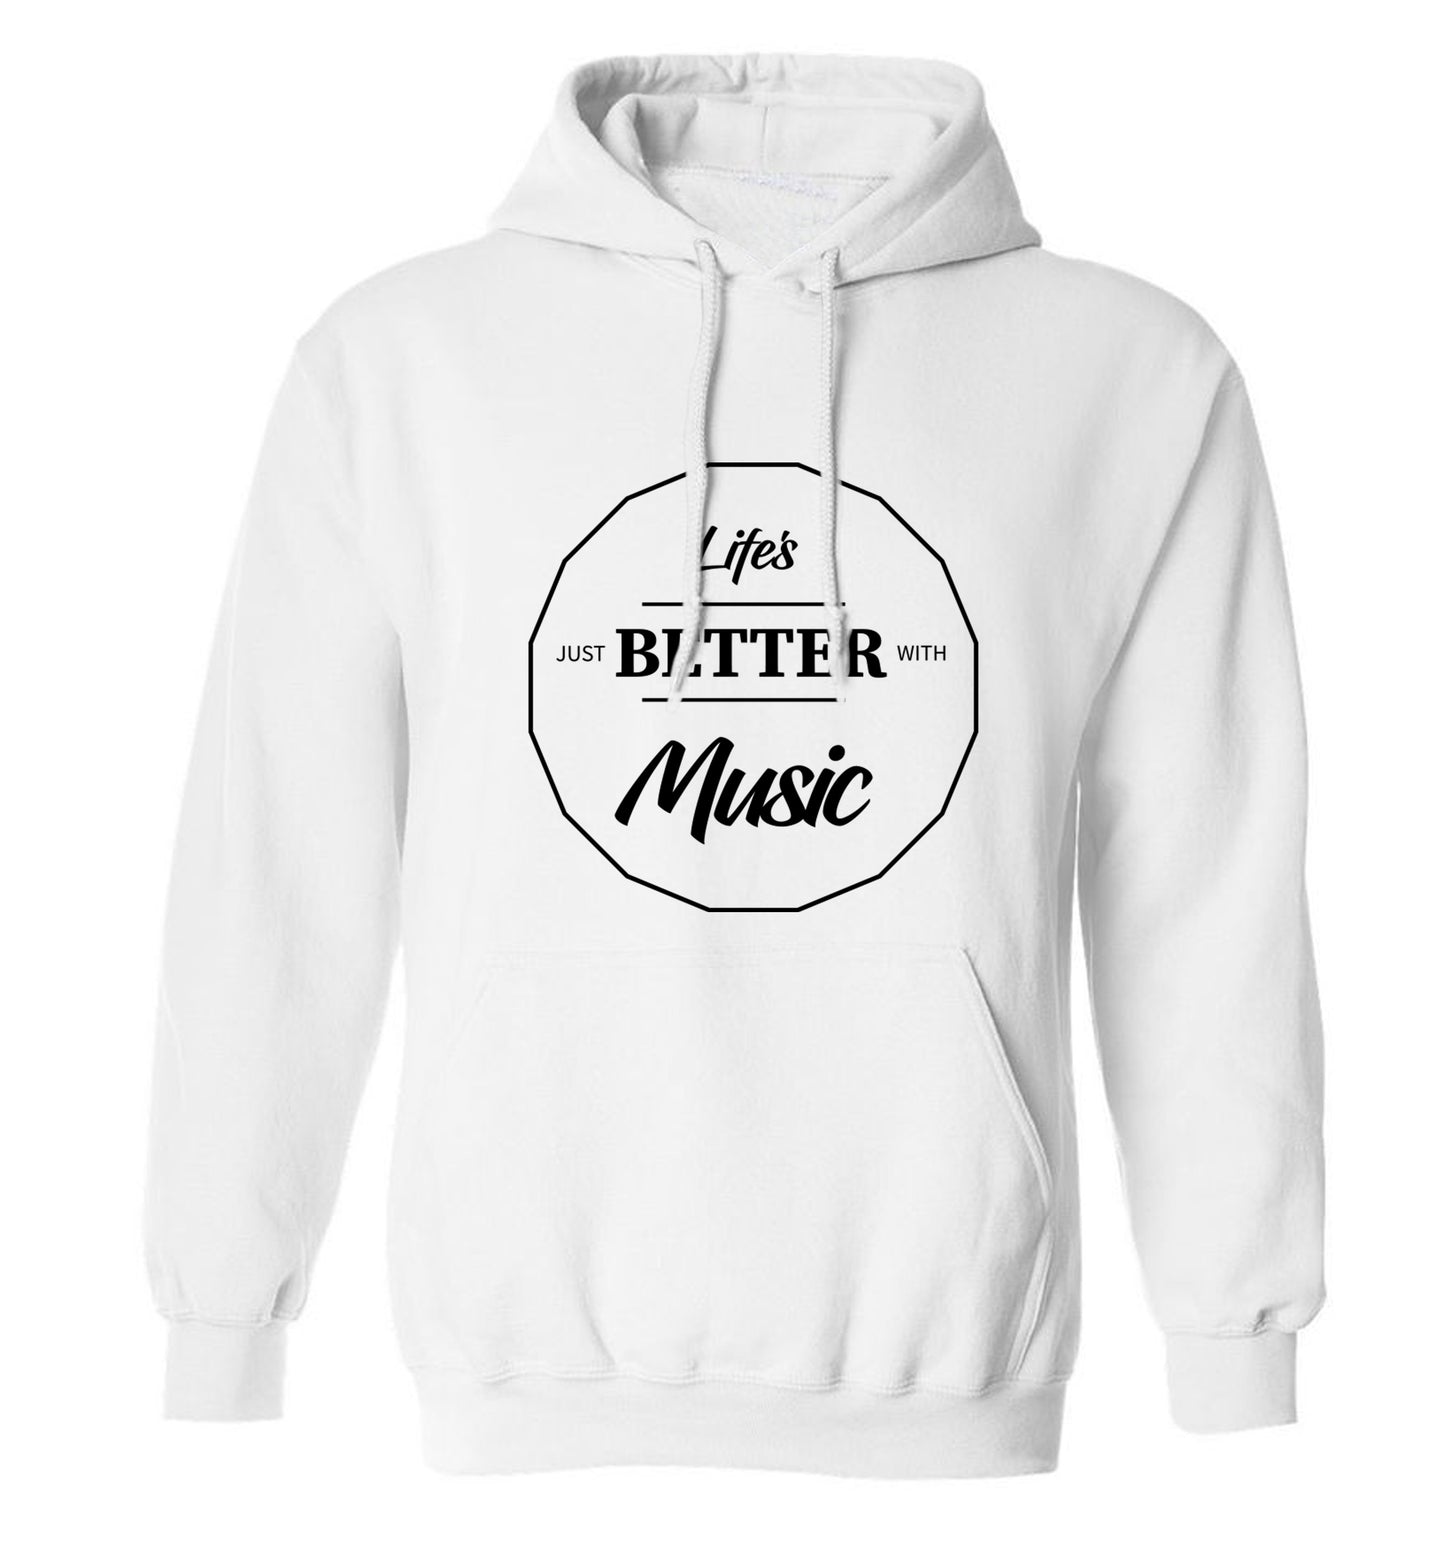 Life is Better With Music adults unisex white hoodie 2XL